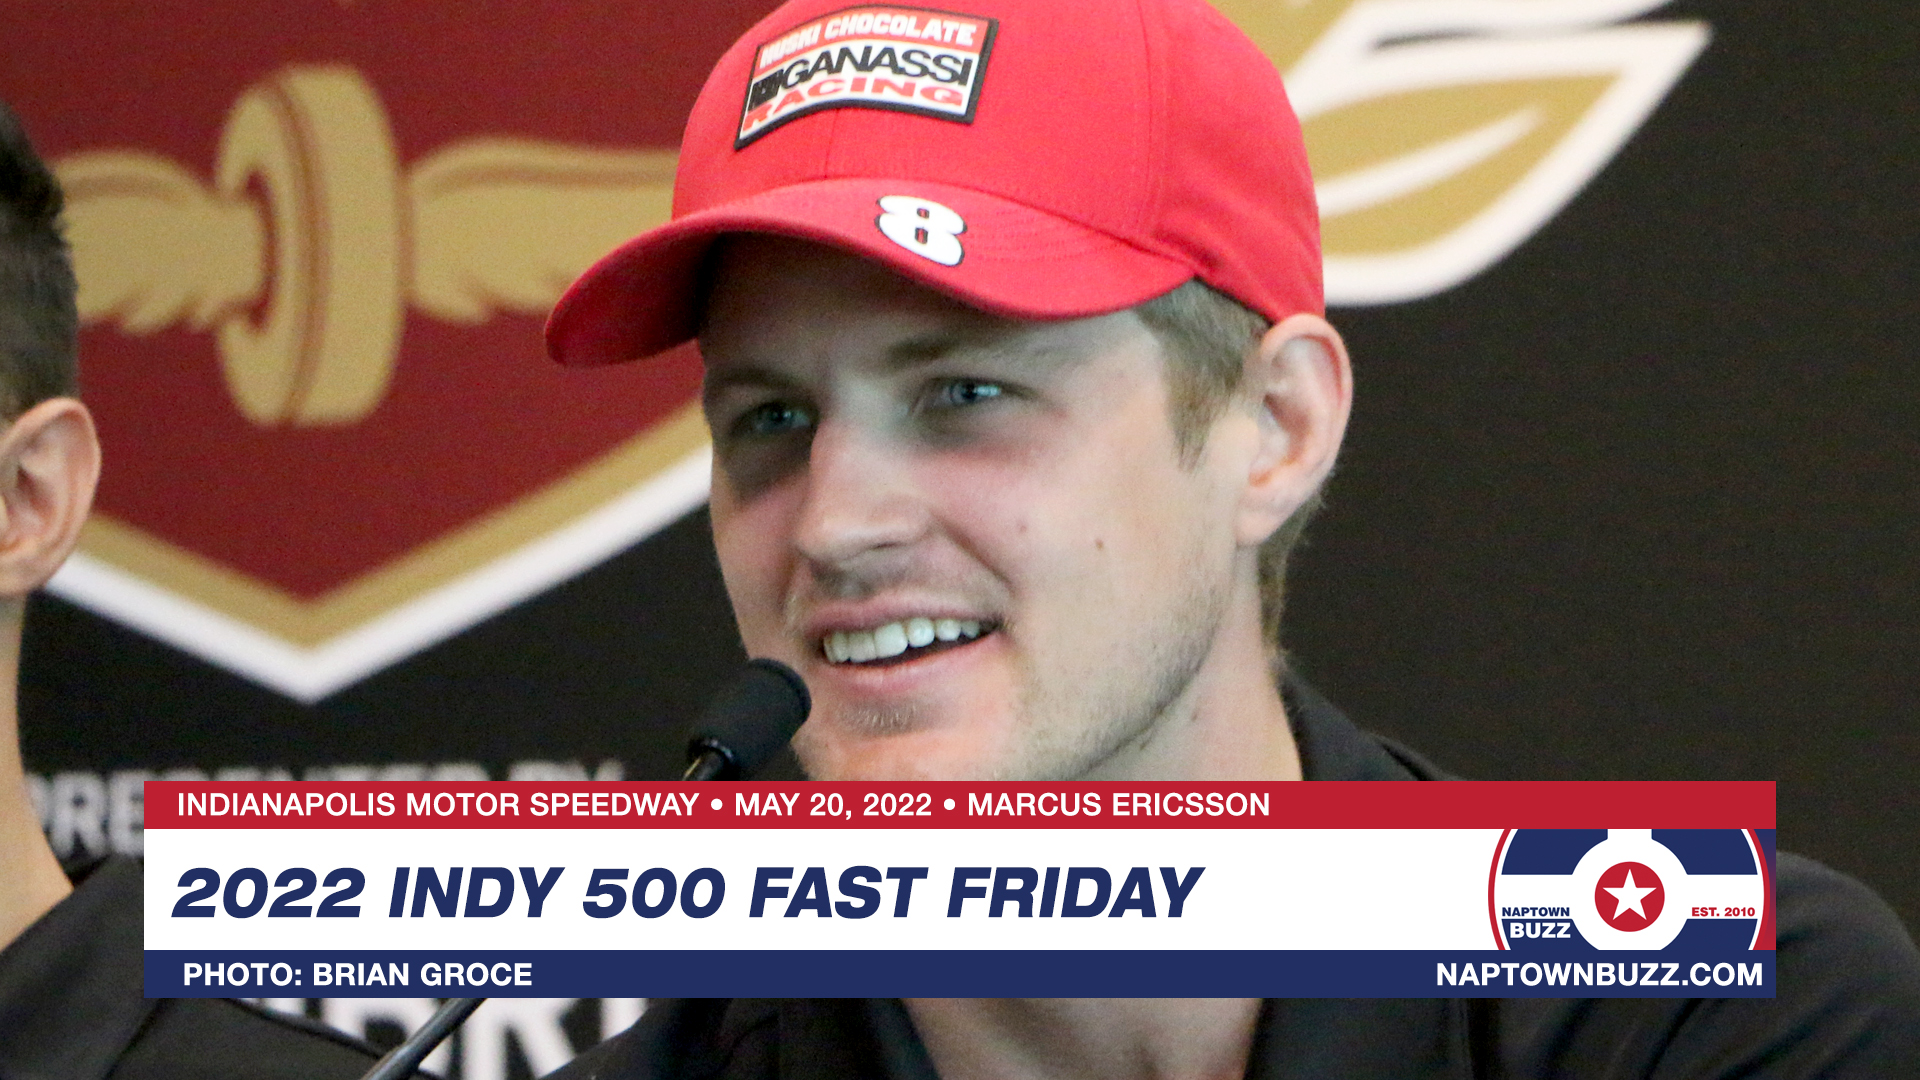 Marcus Ericsson on Indy 500 Fast Friday Practice at Indianapolis Motor Speedway on May 20, 2022